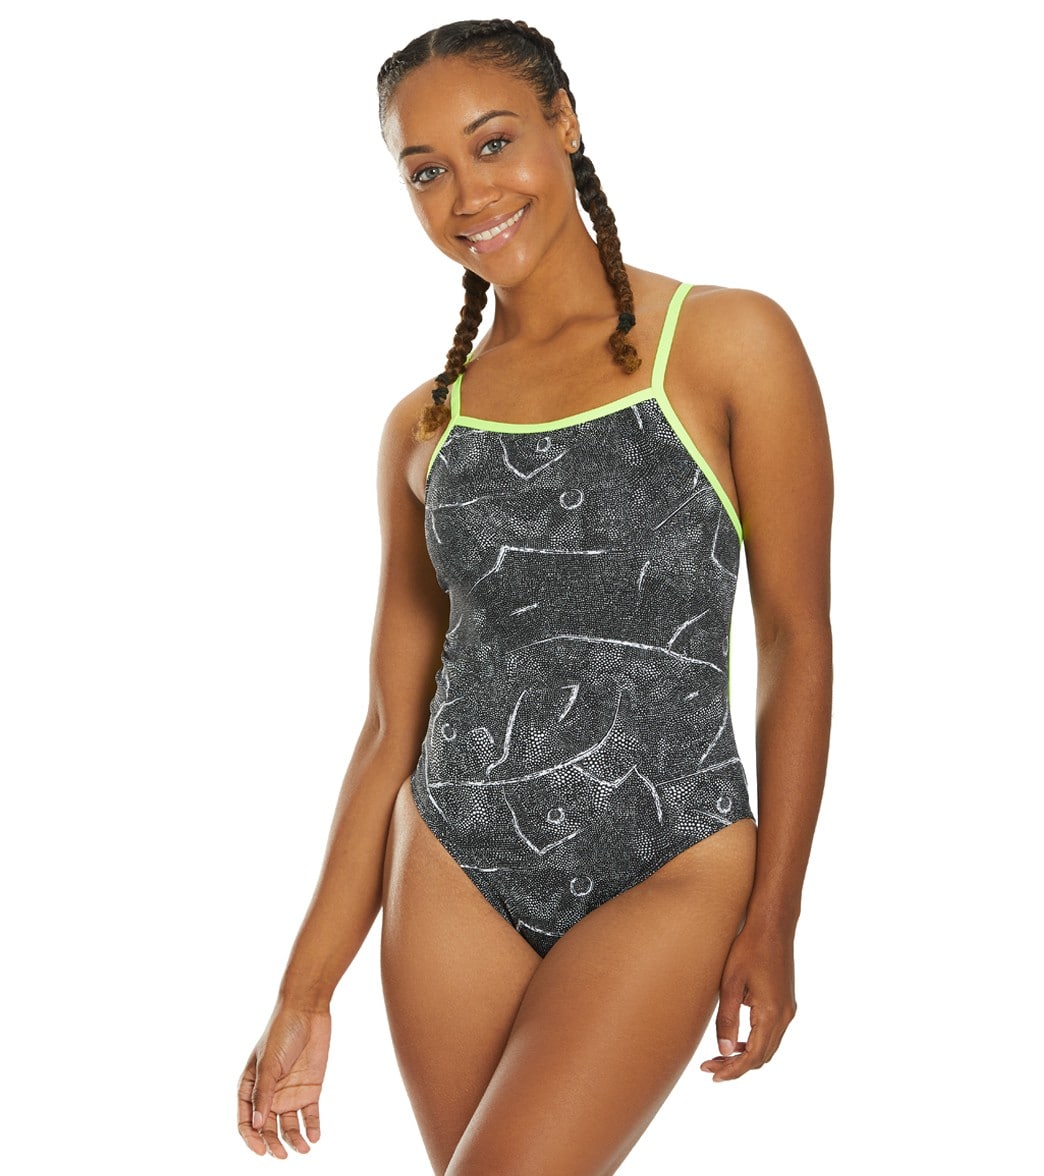 Funkita Women's Crack Up Tie Me Tight One Piece Swimsuit - Black/White 30L Polyester - Swimoutlet.com